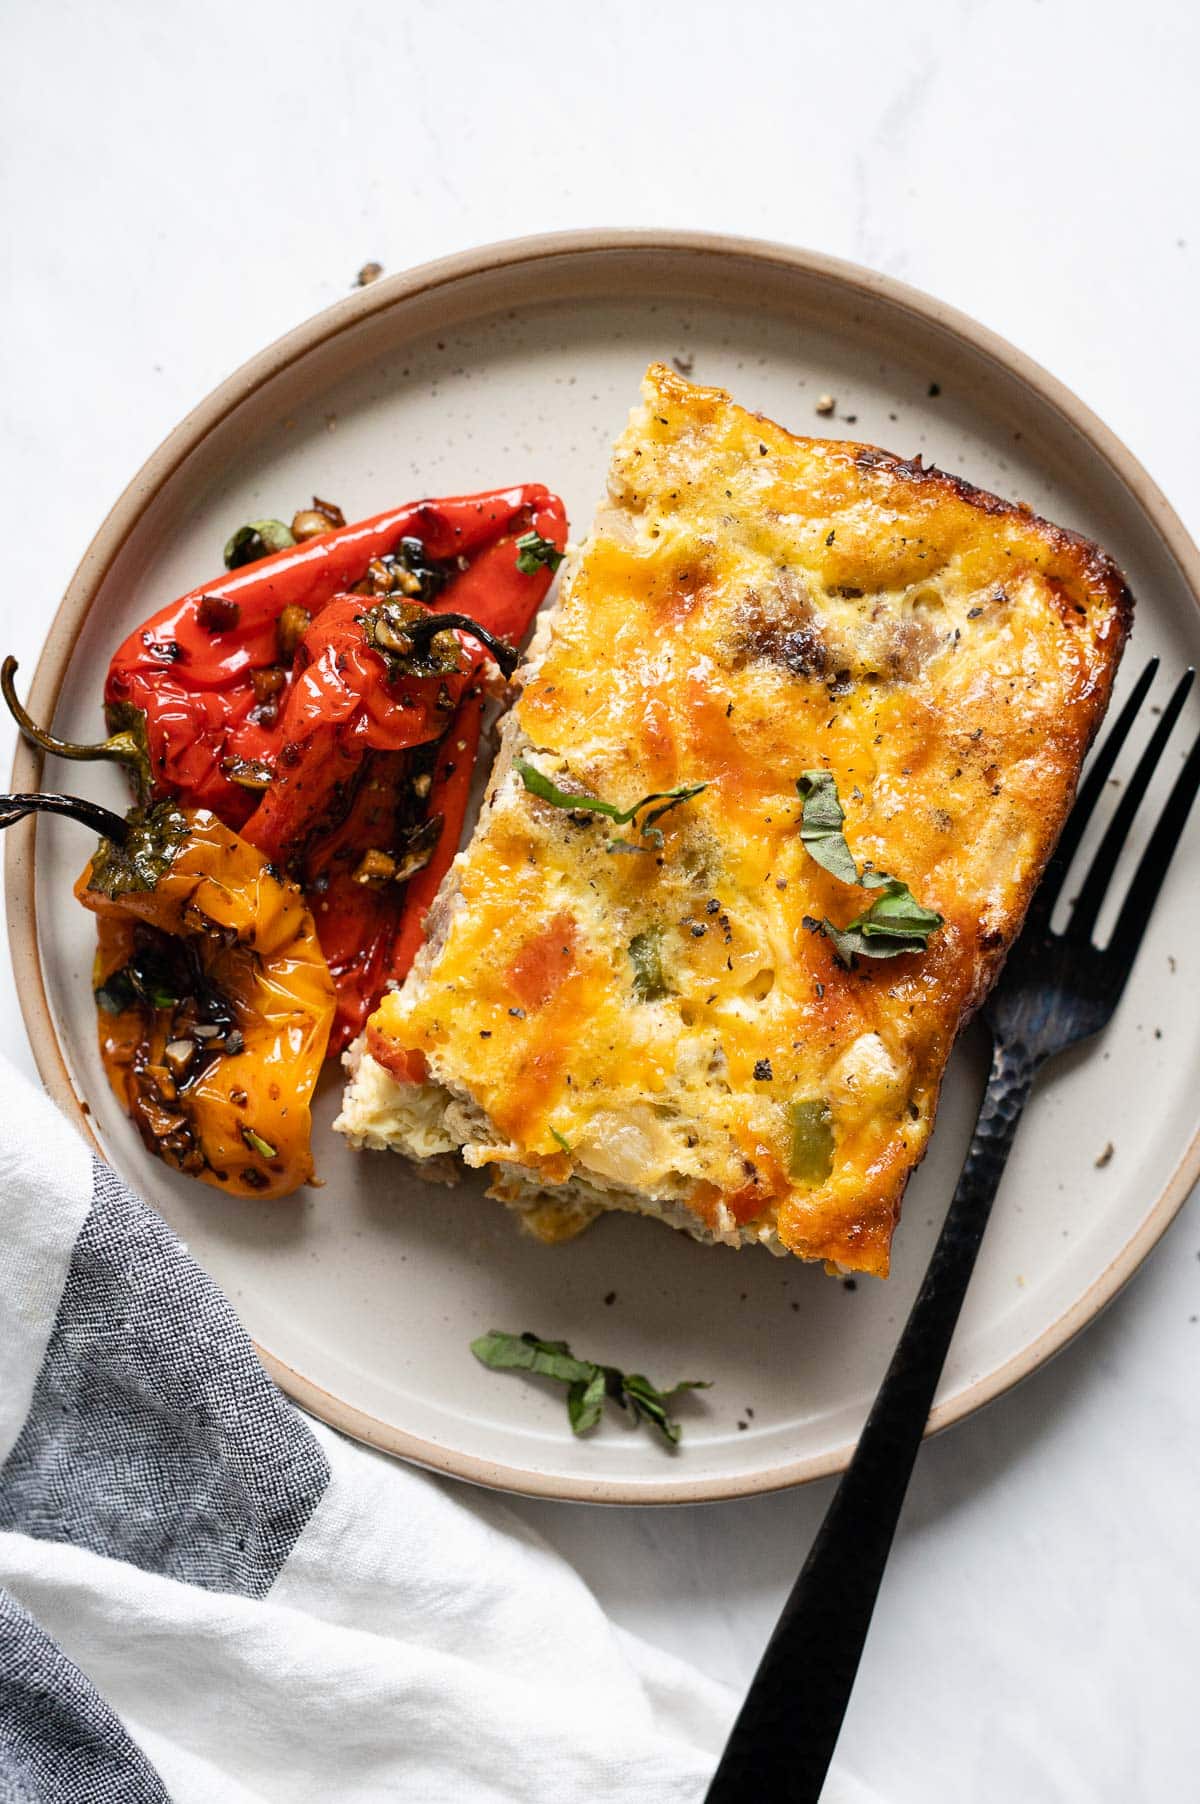 A slice of low carb breakfast casserole with roasted mini peppers on a plate with a fork.